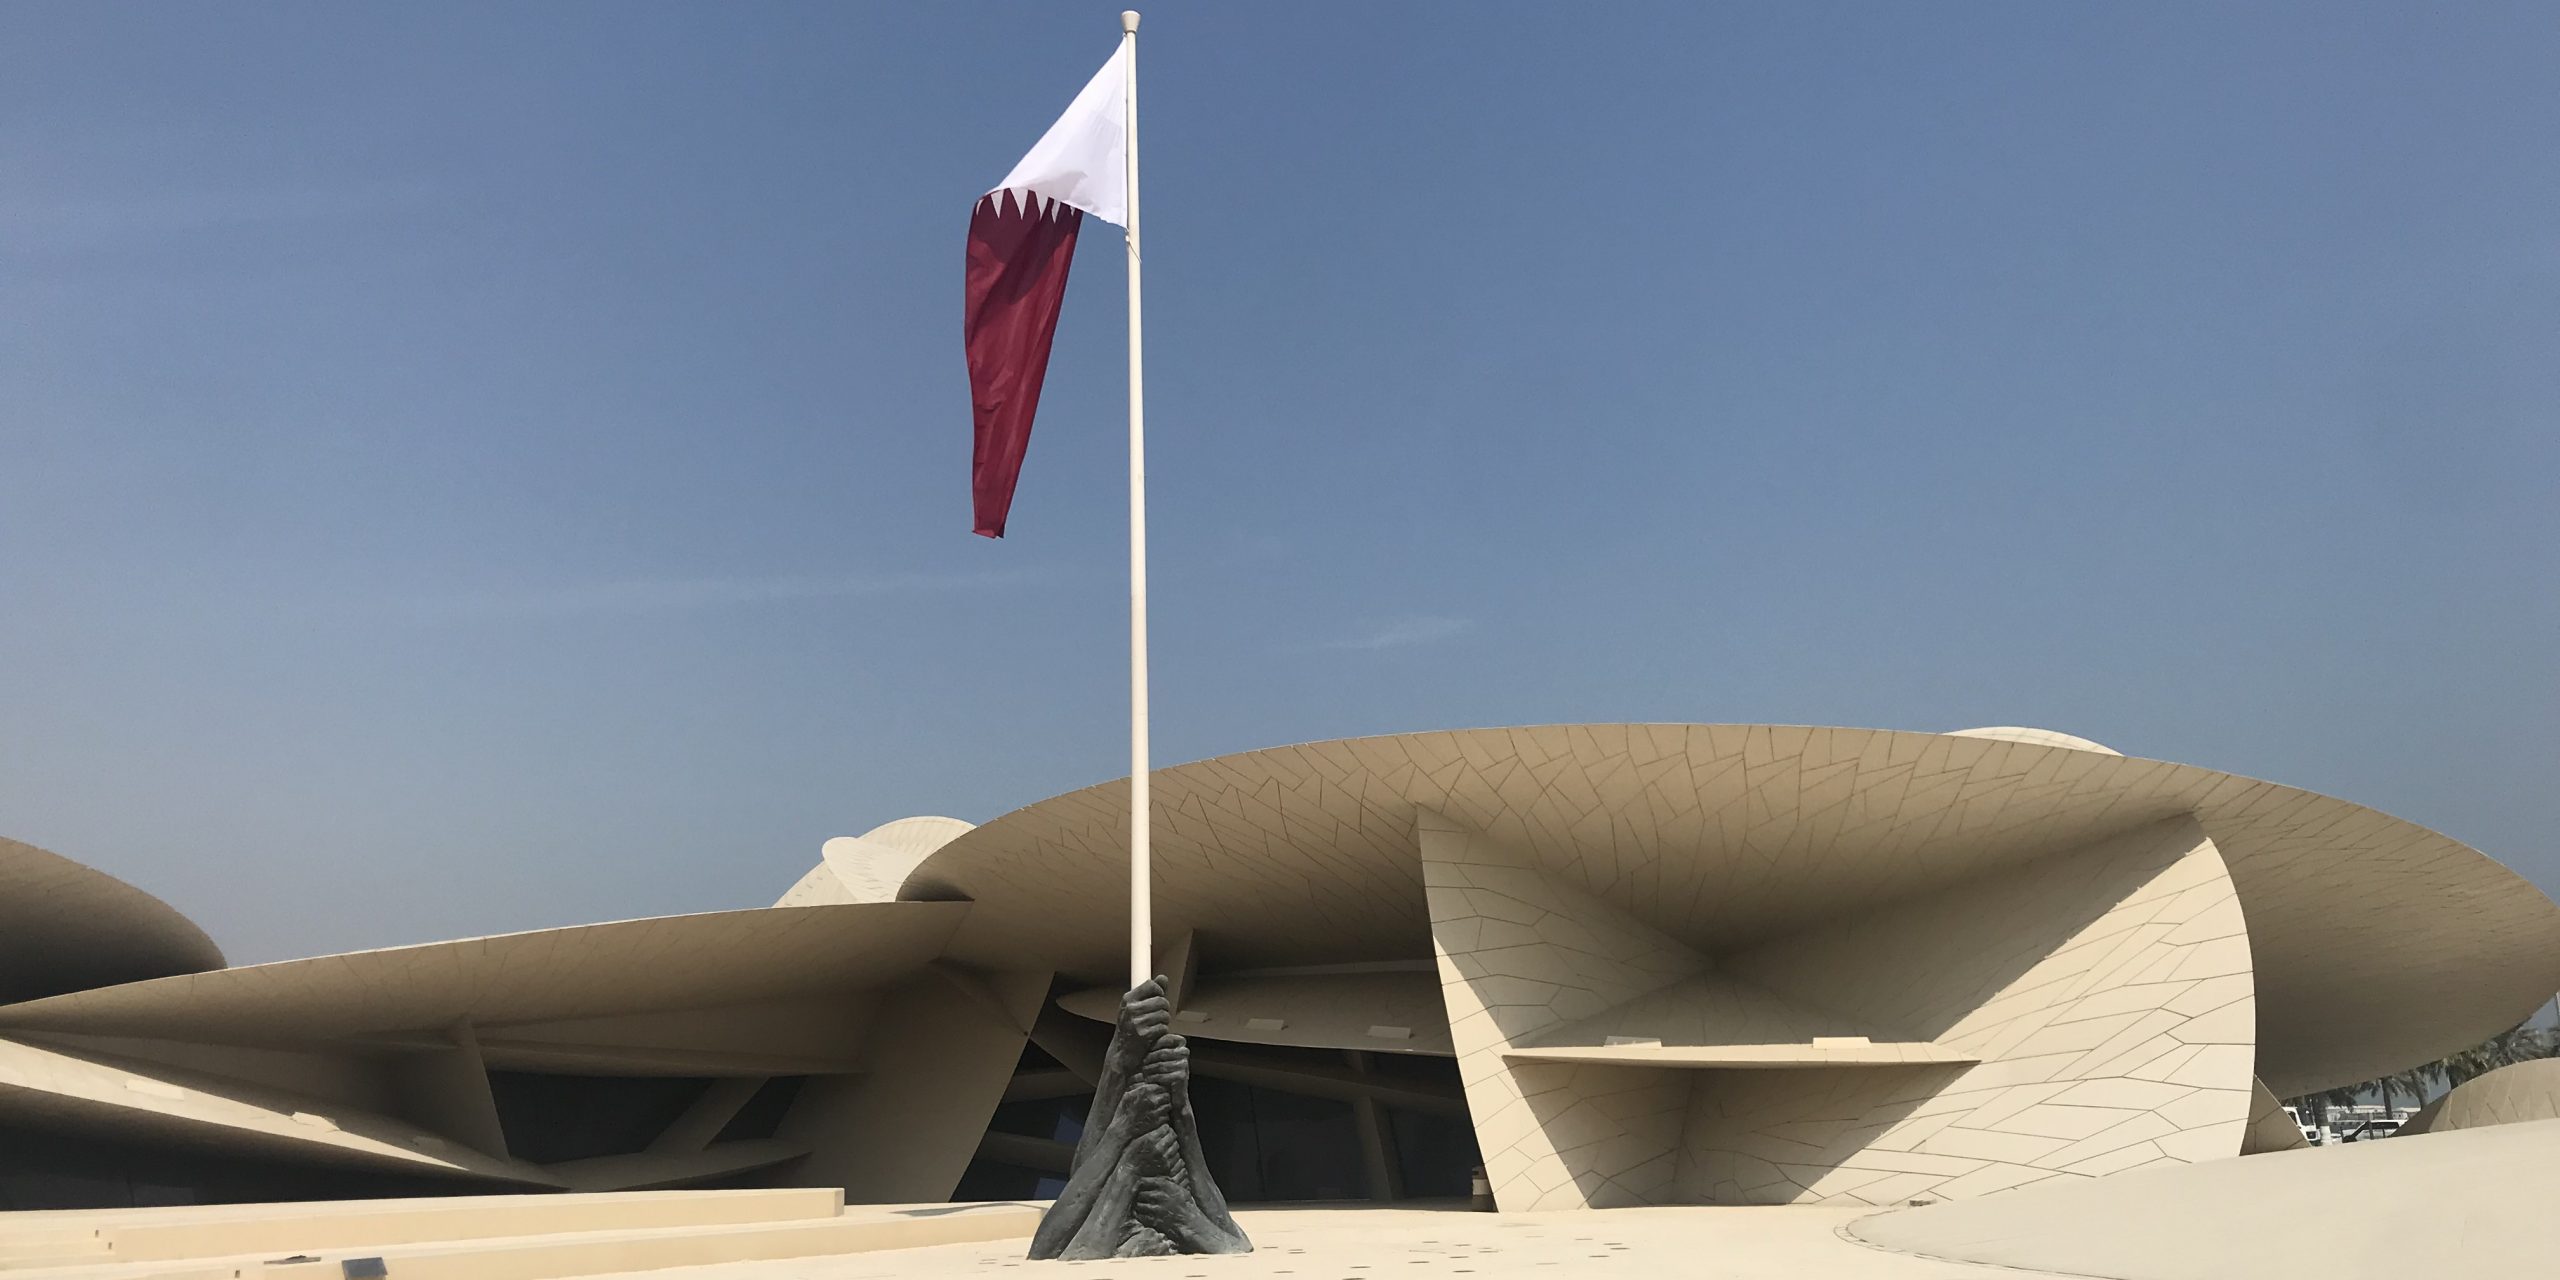 Qatar Museums calling artists to propose permanent public artwork